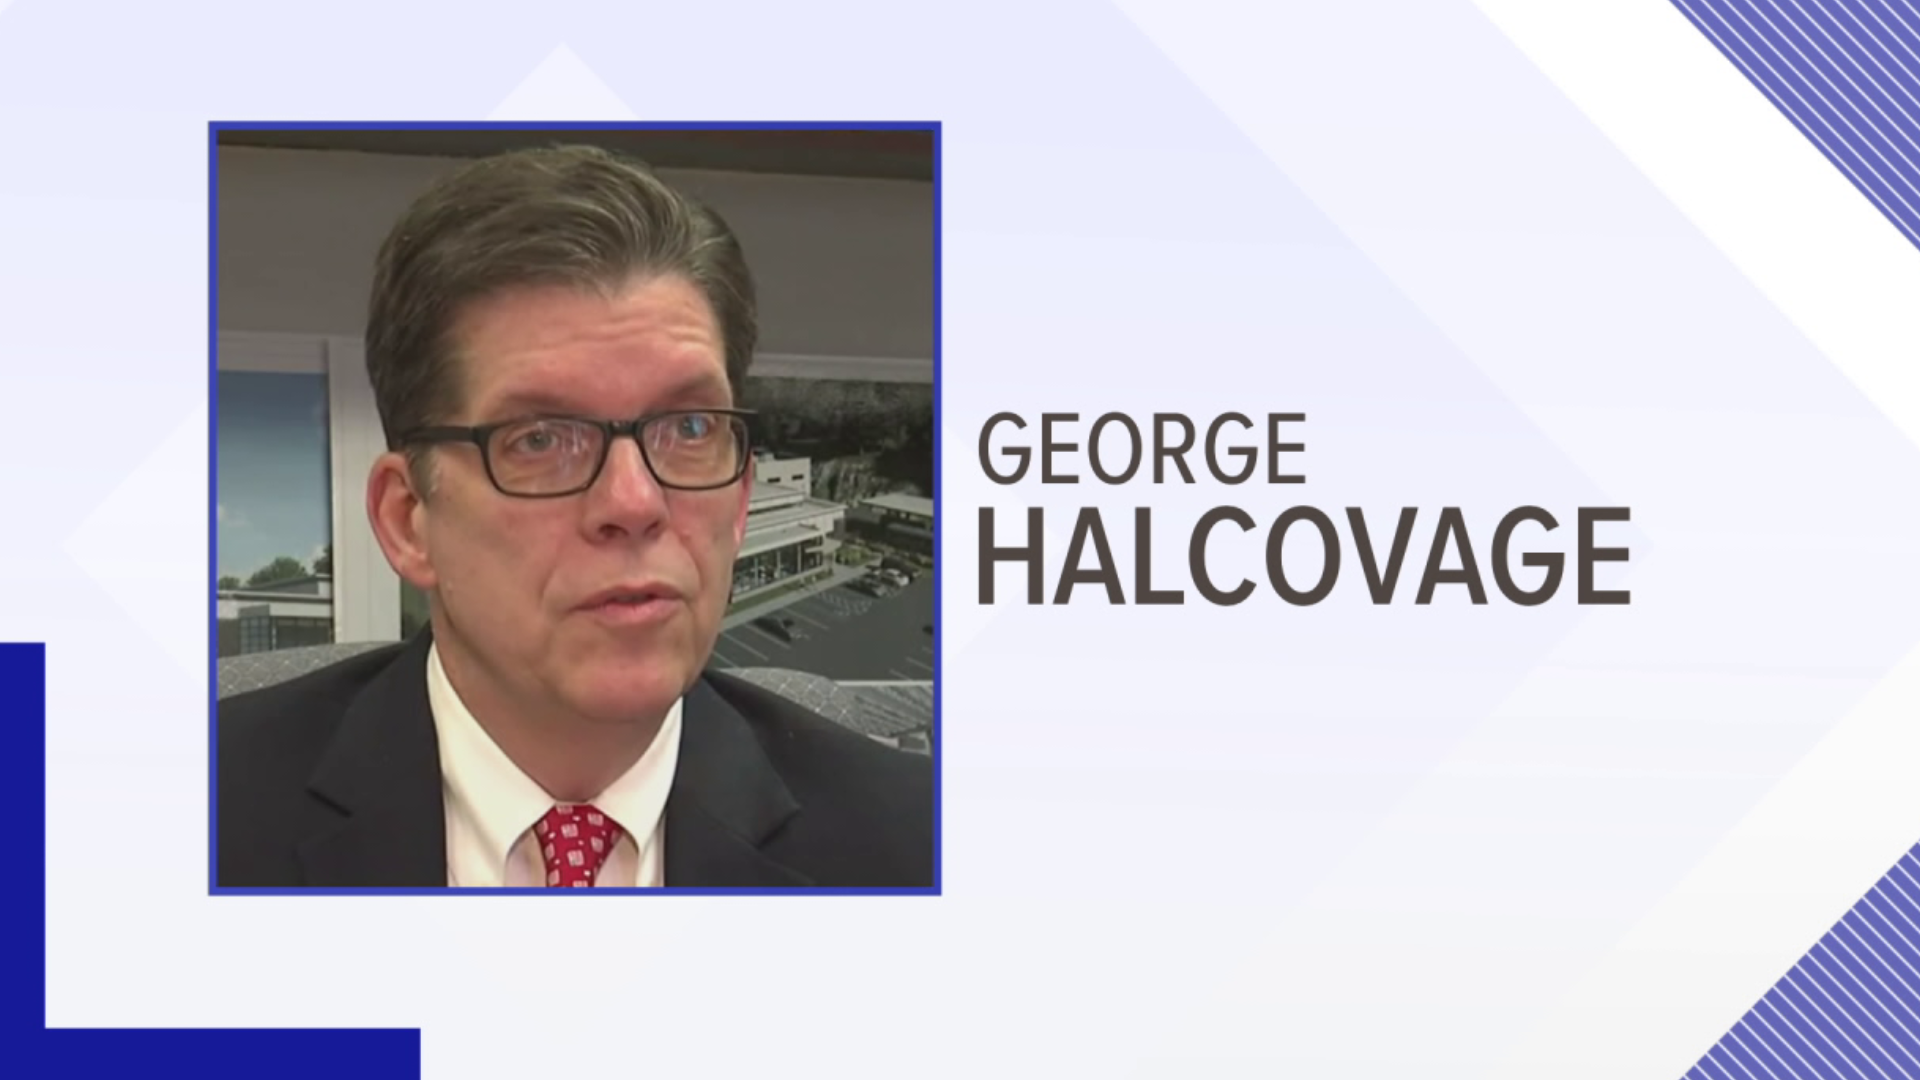 One of the accusers says Commissioner George Halcovage is a "serial harasser".